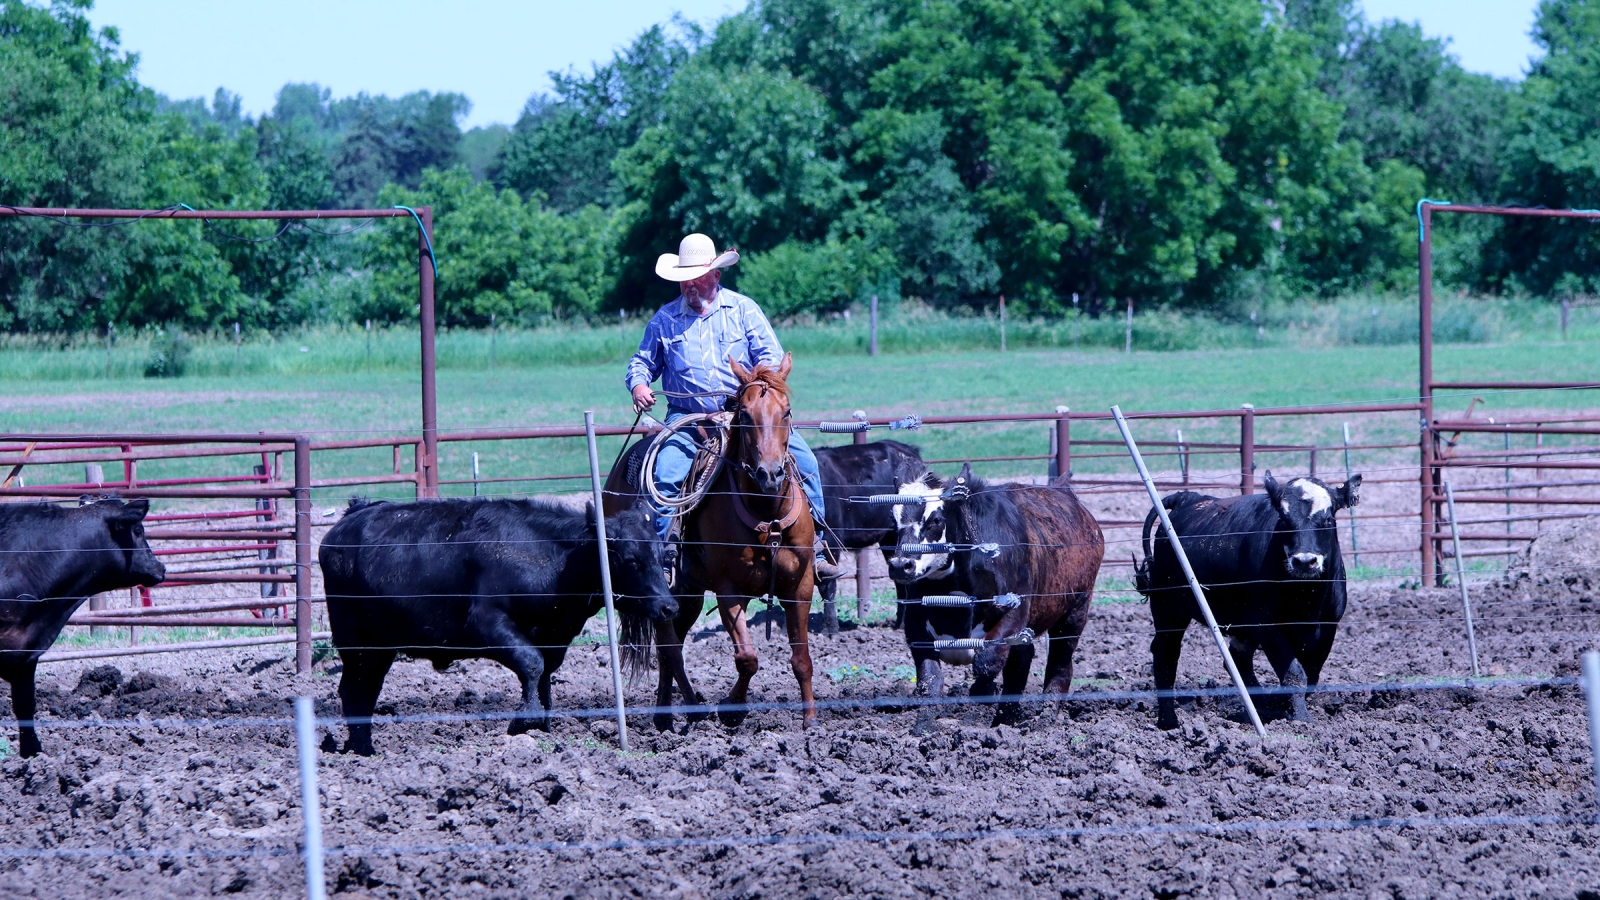 A man on a horse in a feedyard surrounded by cows